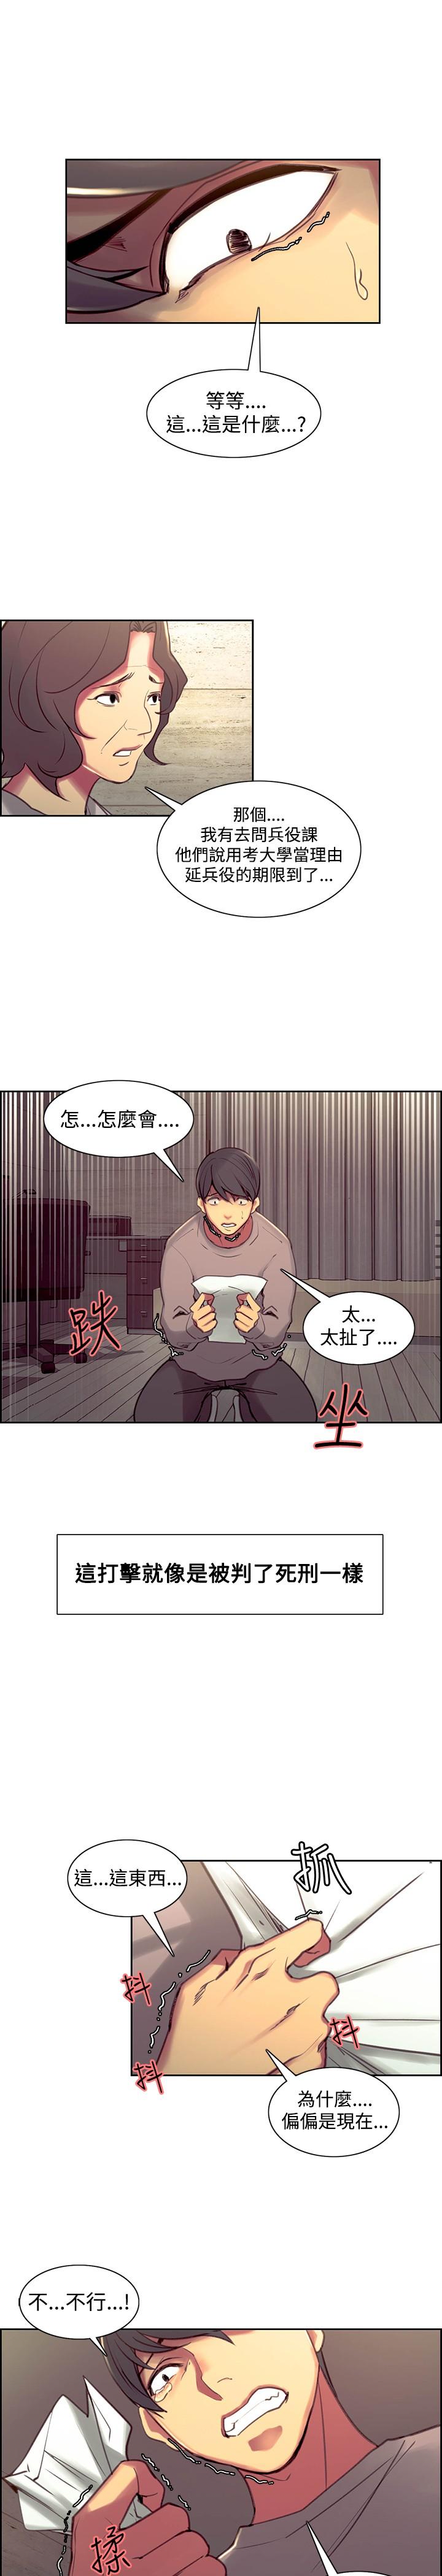 [Serious] Domesticate the Housekeeper 调教家政妇 Ch.29~44END [Chinese]中文 269